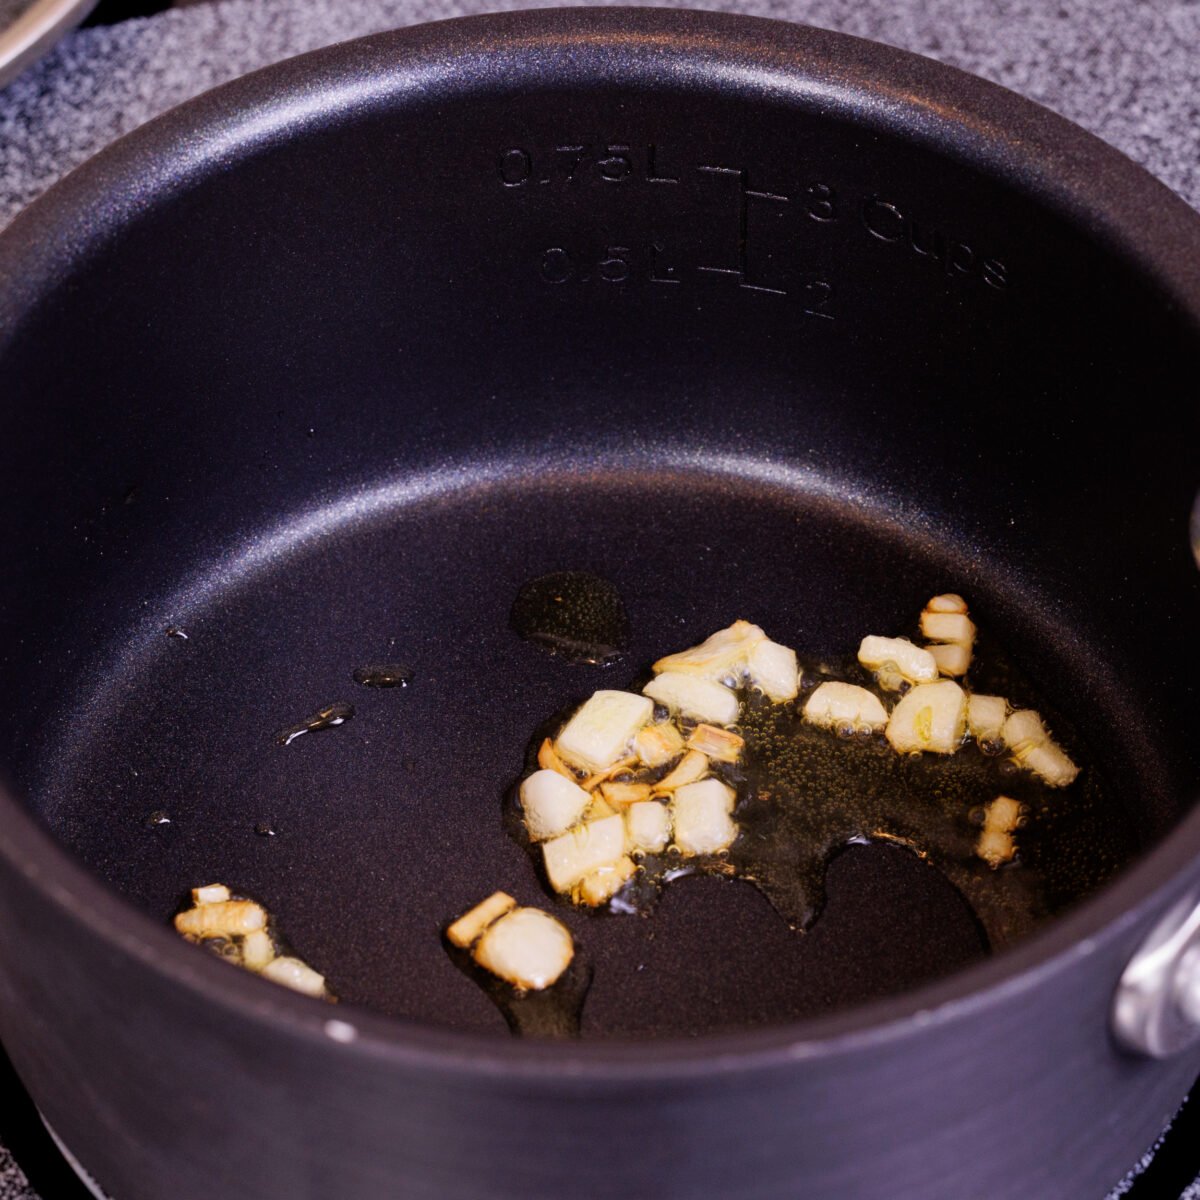 minced garlic sauteeing in a small saucepan on a stove.